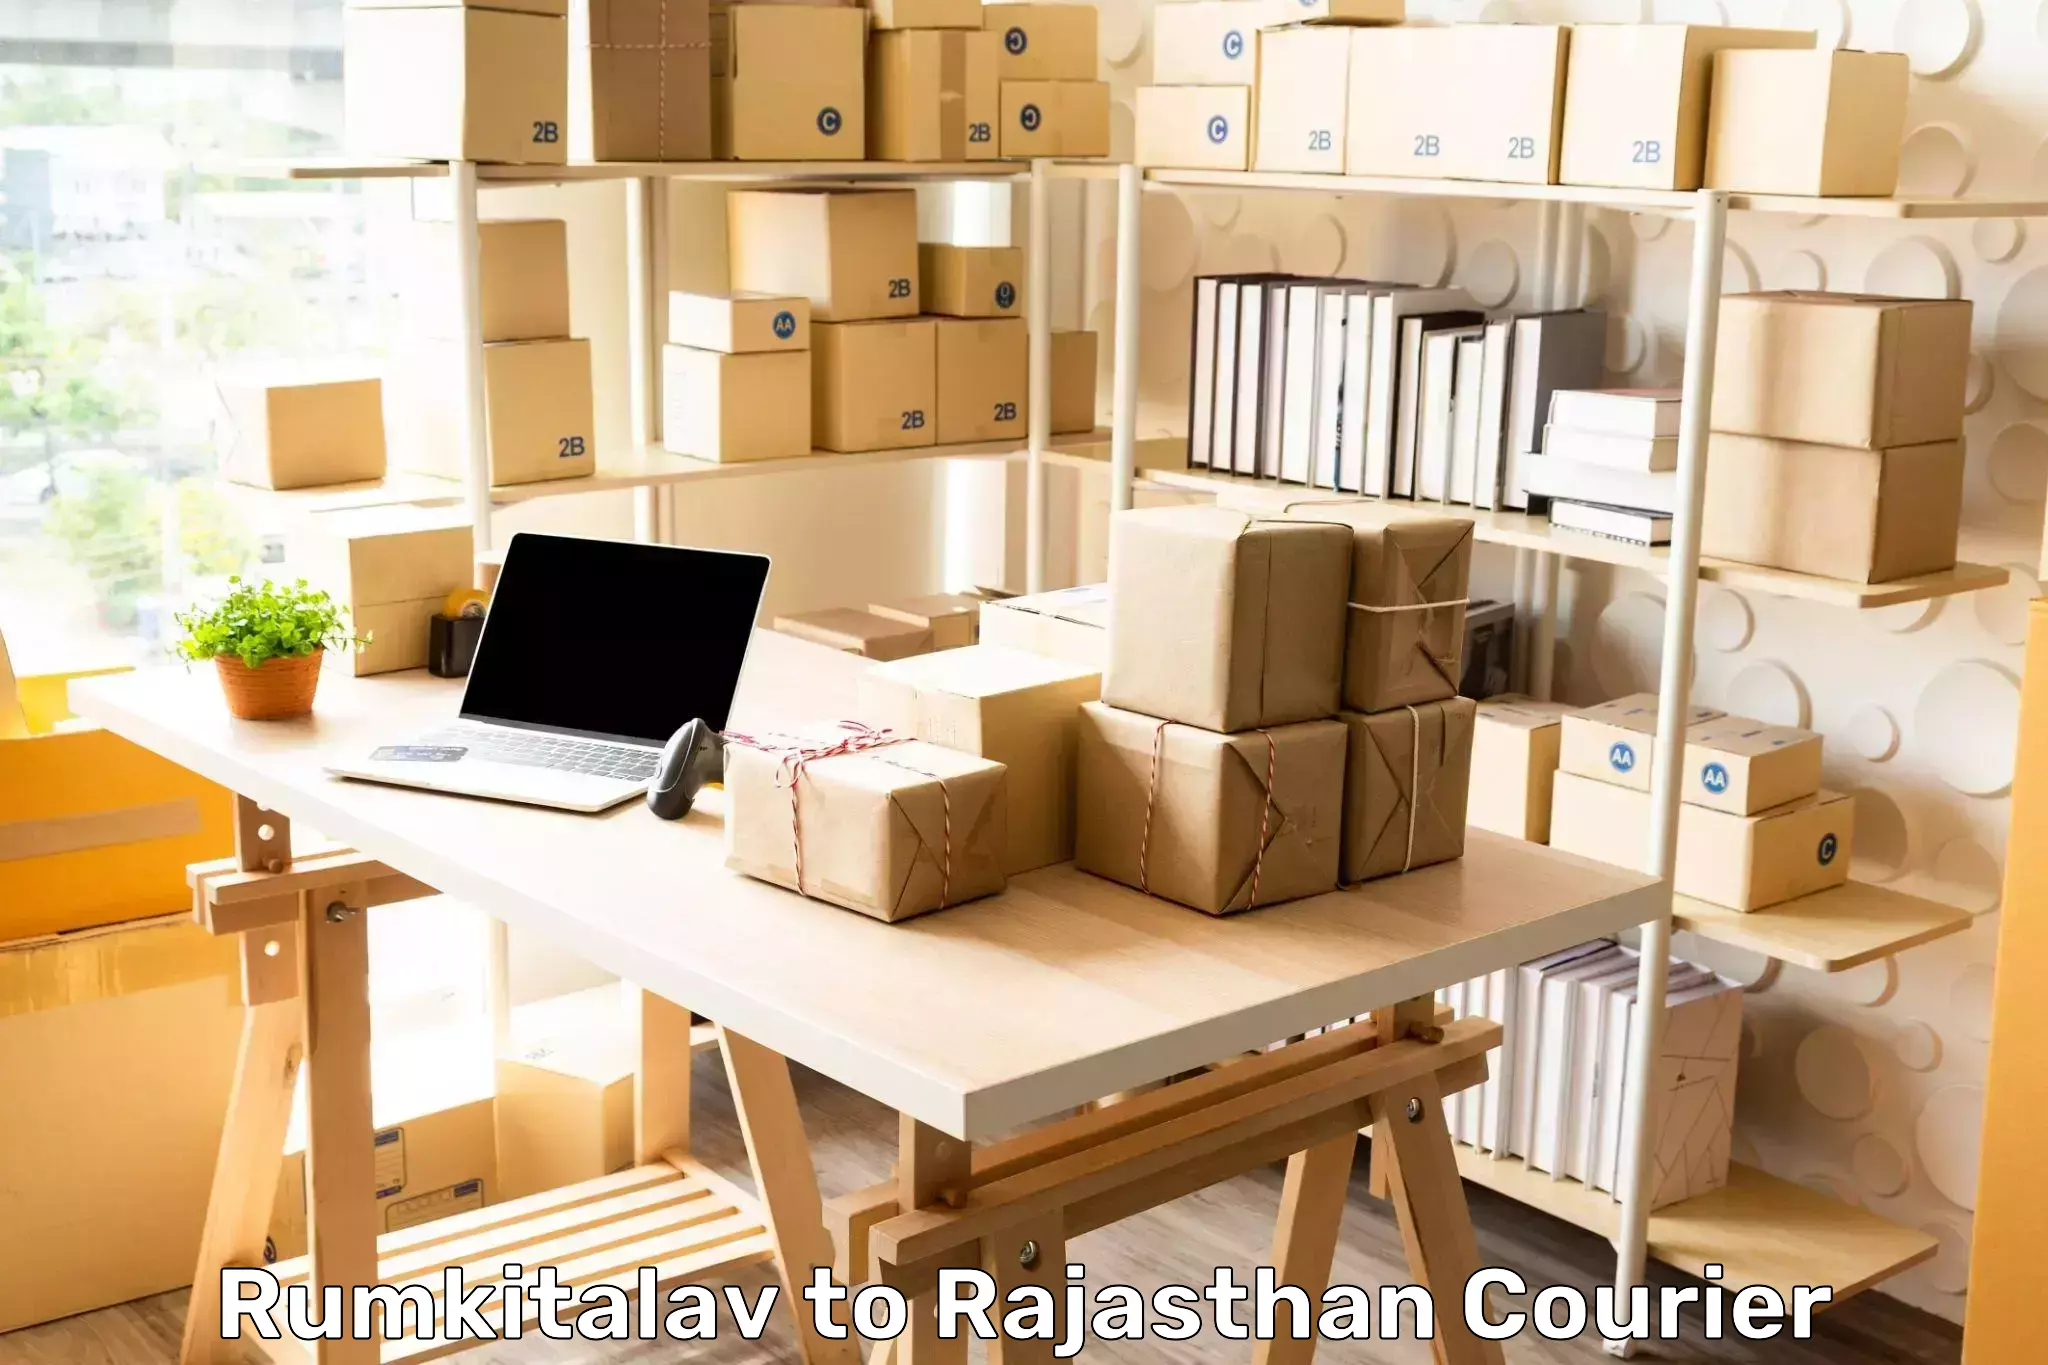 Express mail solutions Rumkitalav to Rajasthan